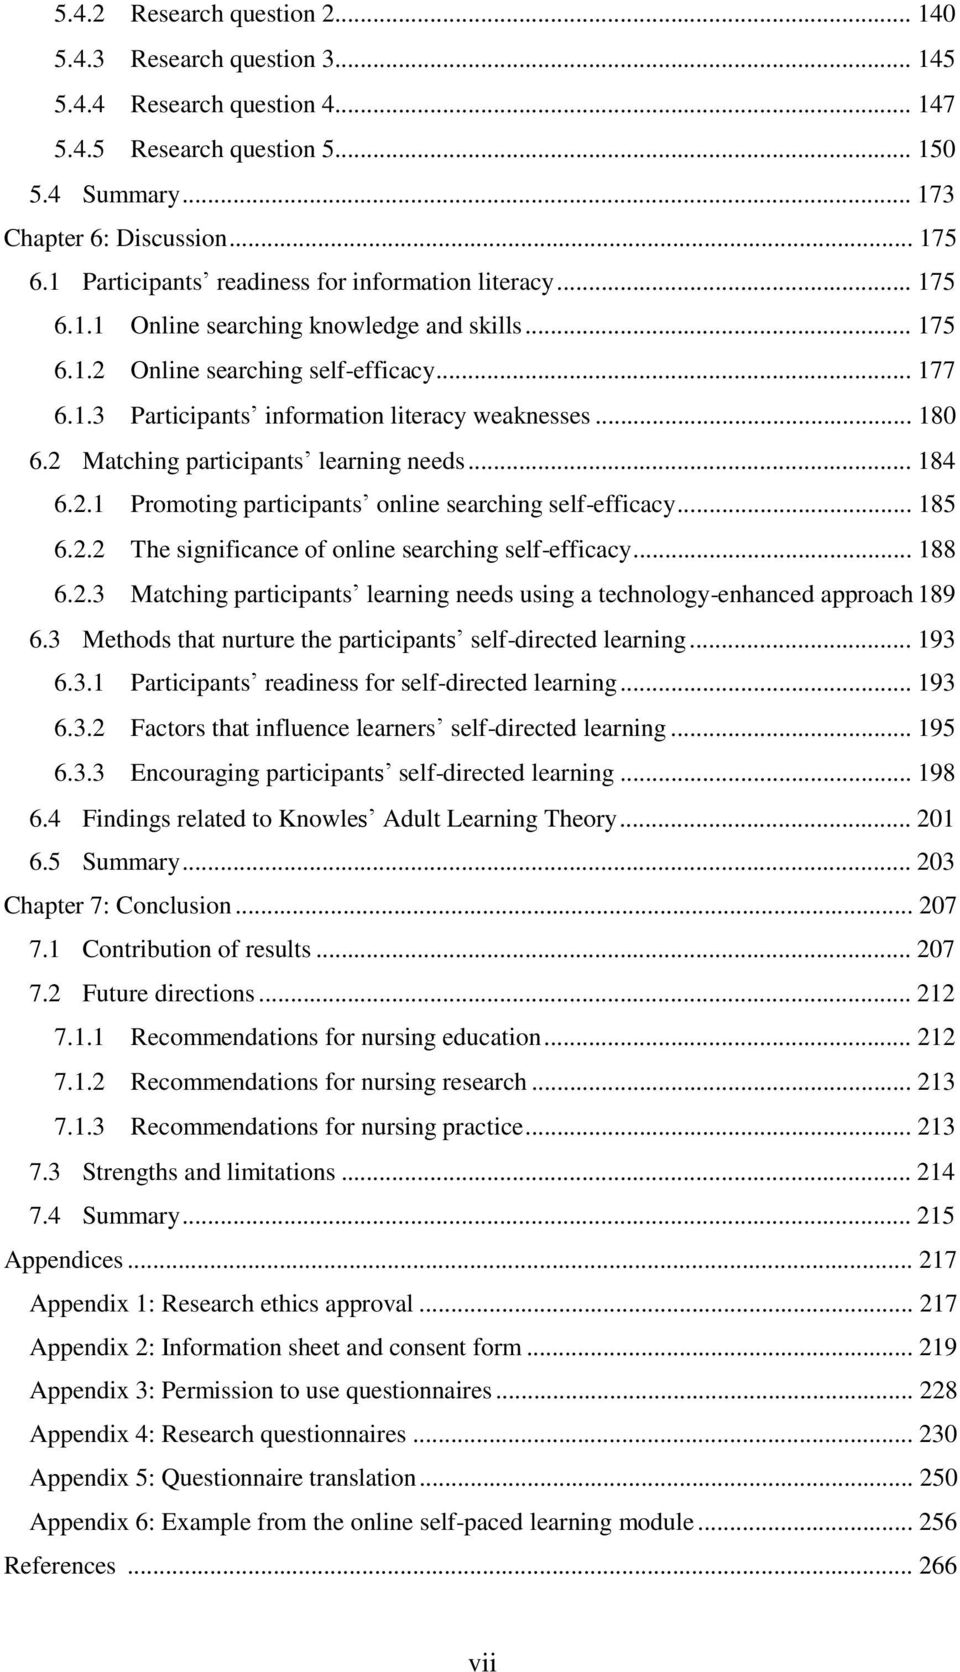 .. 180 6.2 Matching participants learning needs... 184 6.2.1 Promoting participants online searching self-efficacy... 185 6.2.2 The significance of online searching self-efficacy... 188 6.2.3 Matching participants learning needs using a technology-enhanced approach 189 6.